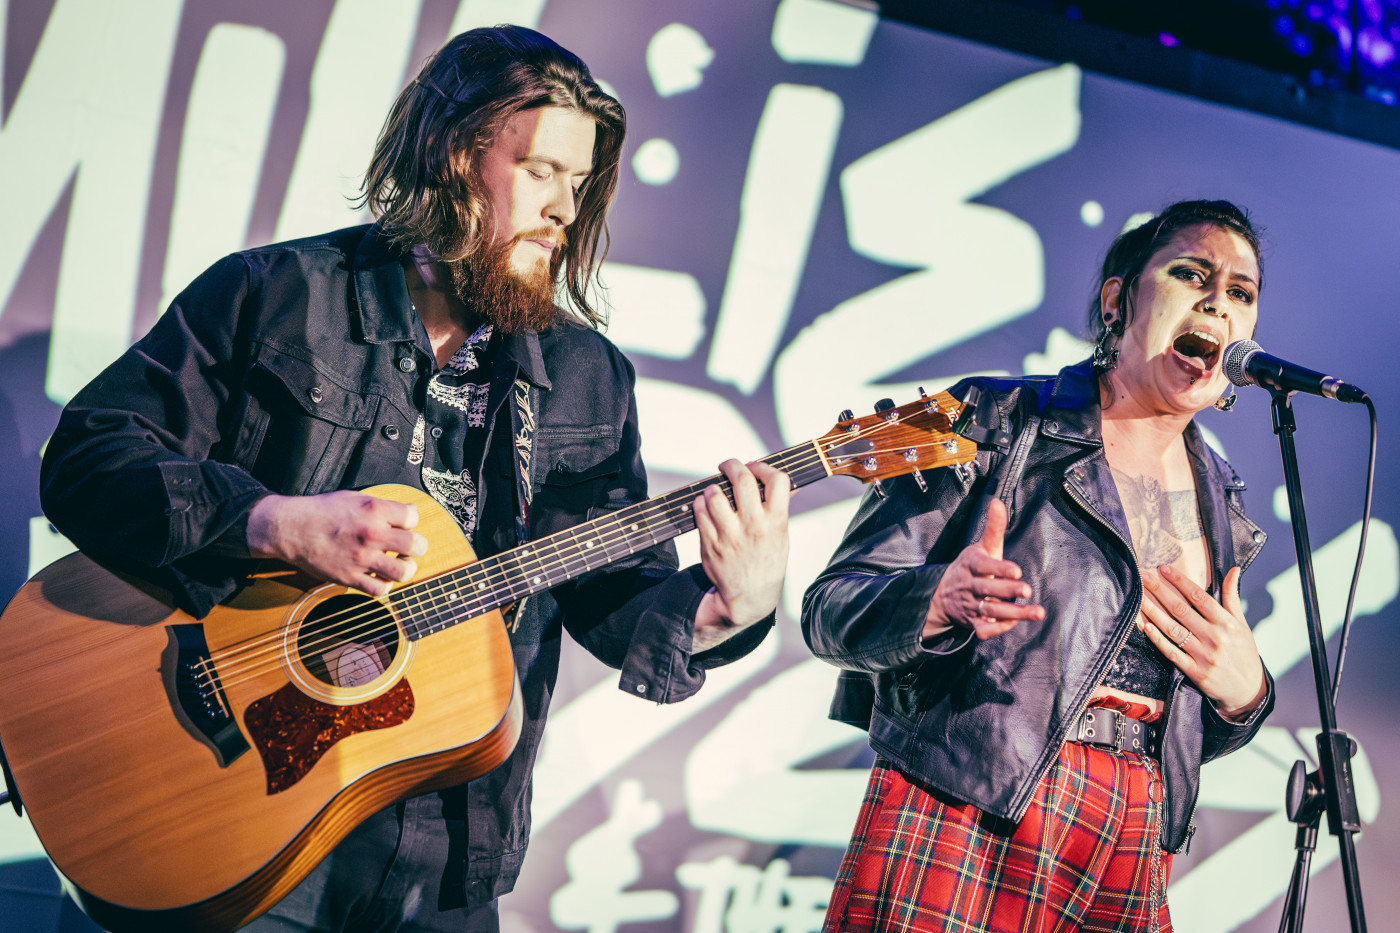 Millie Manders & The Shutup opened the awards with a rare acoustic performance (Photo: Thomas Jackson)